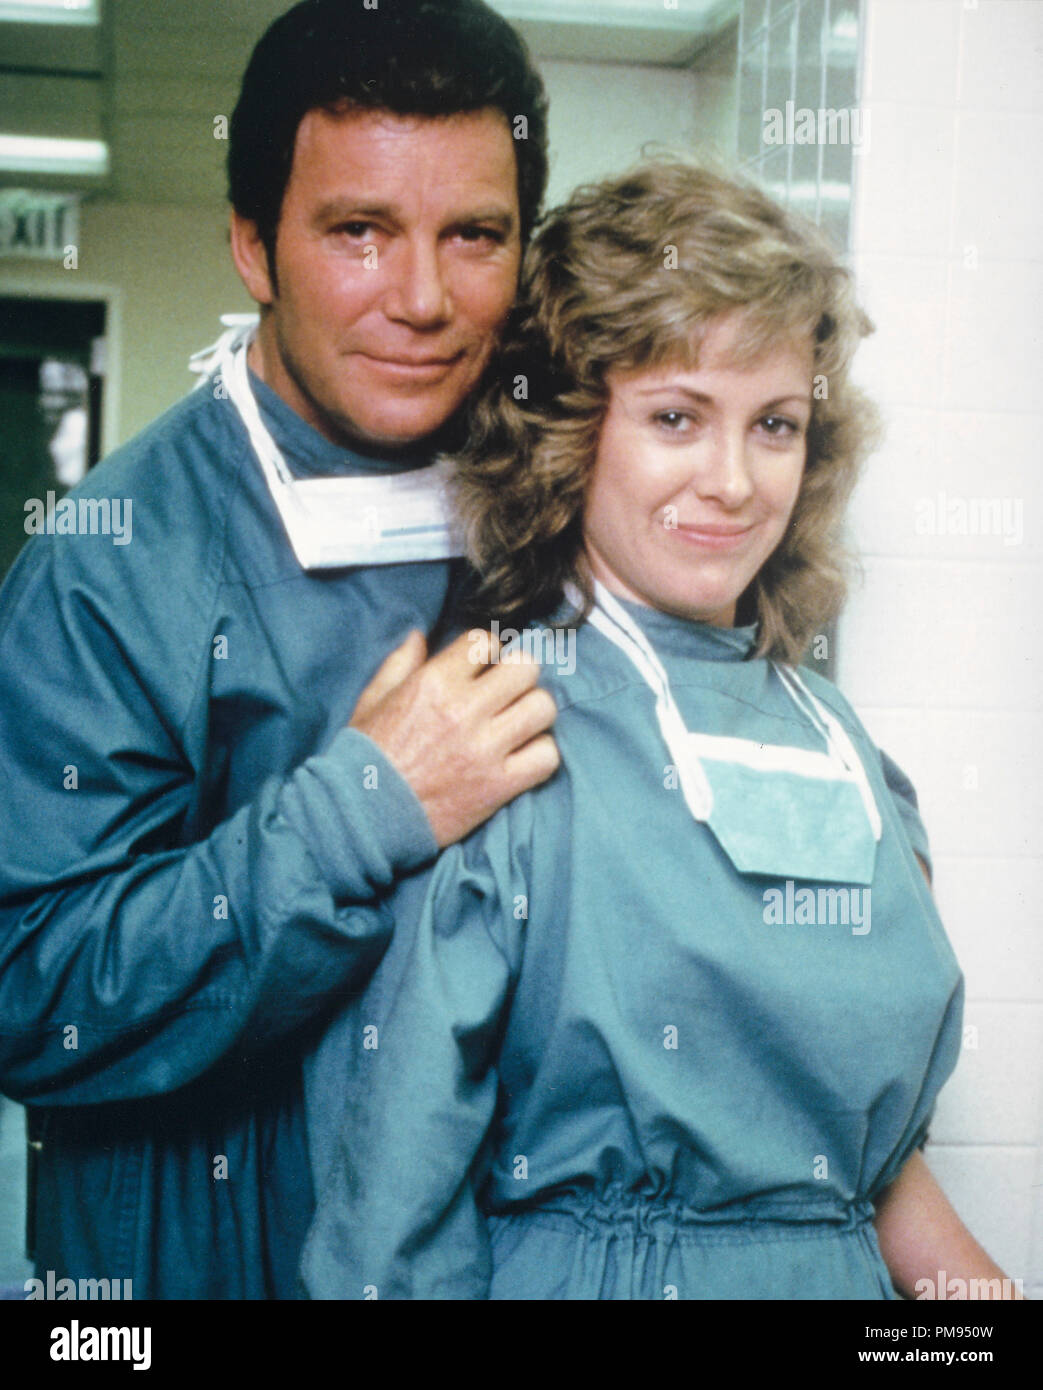 Studio Publicity Still from 'Star Trek IV: The Voyage Home' William Shatner,  Catherine Hicks © 1986 Paramount All Rights Reserved   File Reference # 31700083THA  For Editorial Use Only Stock Photo